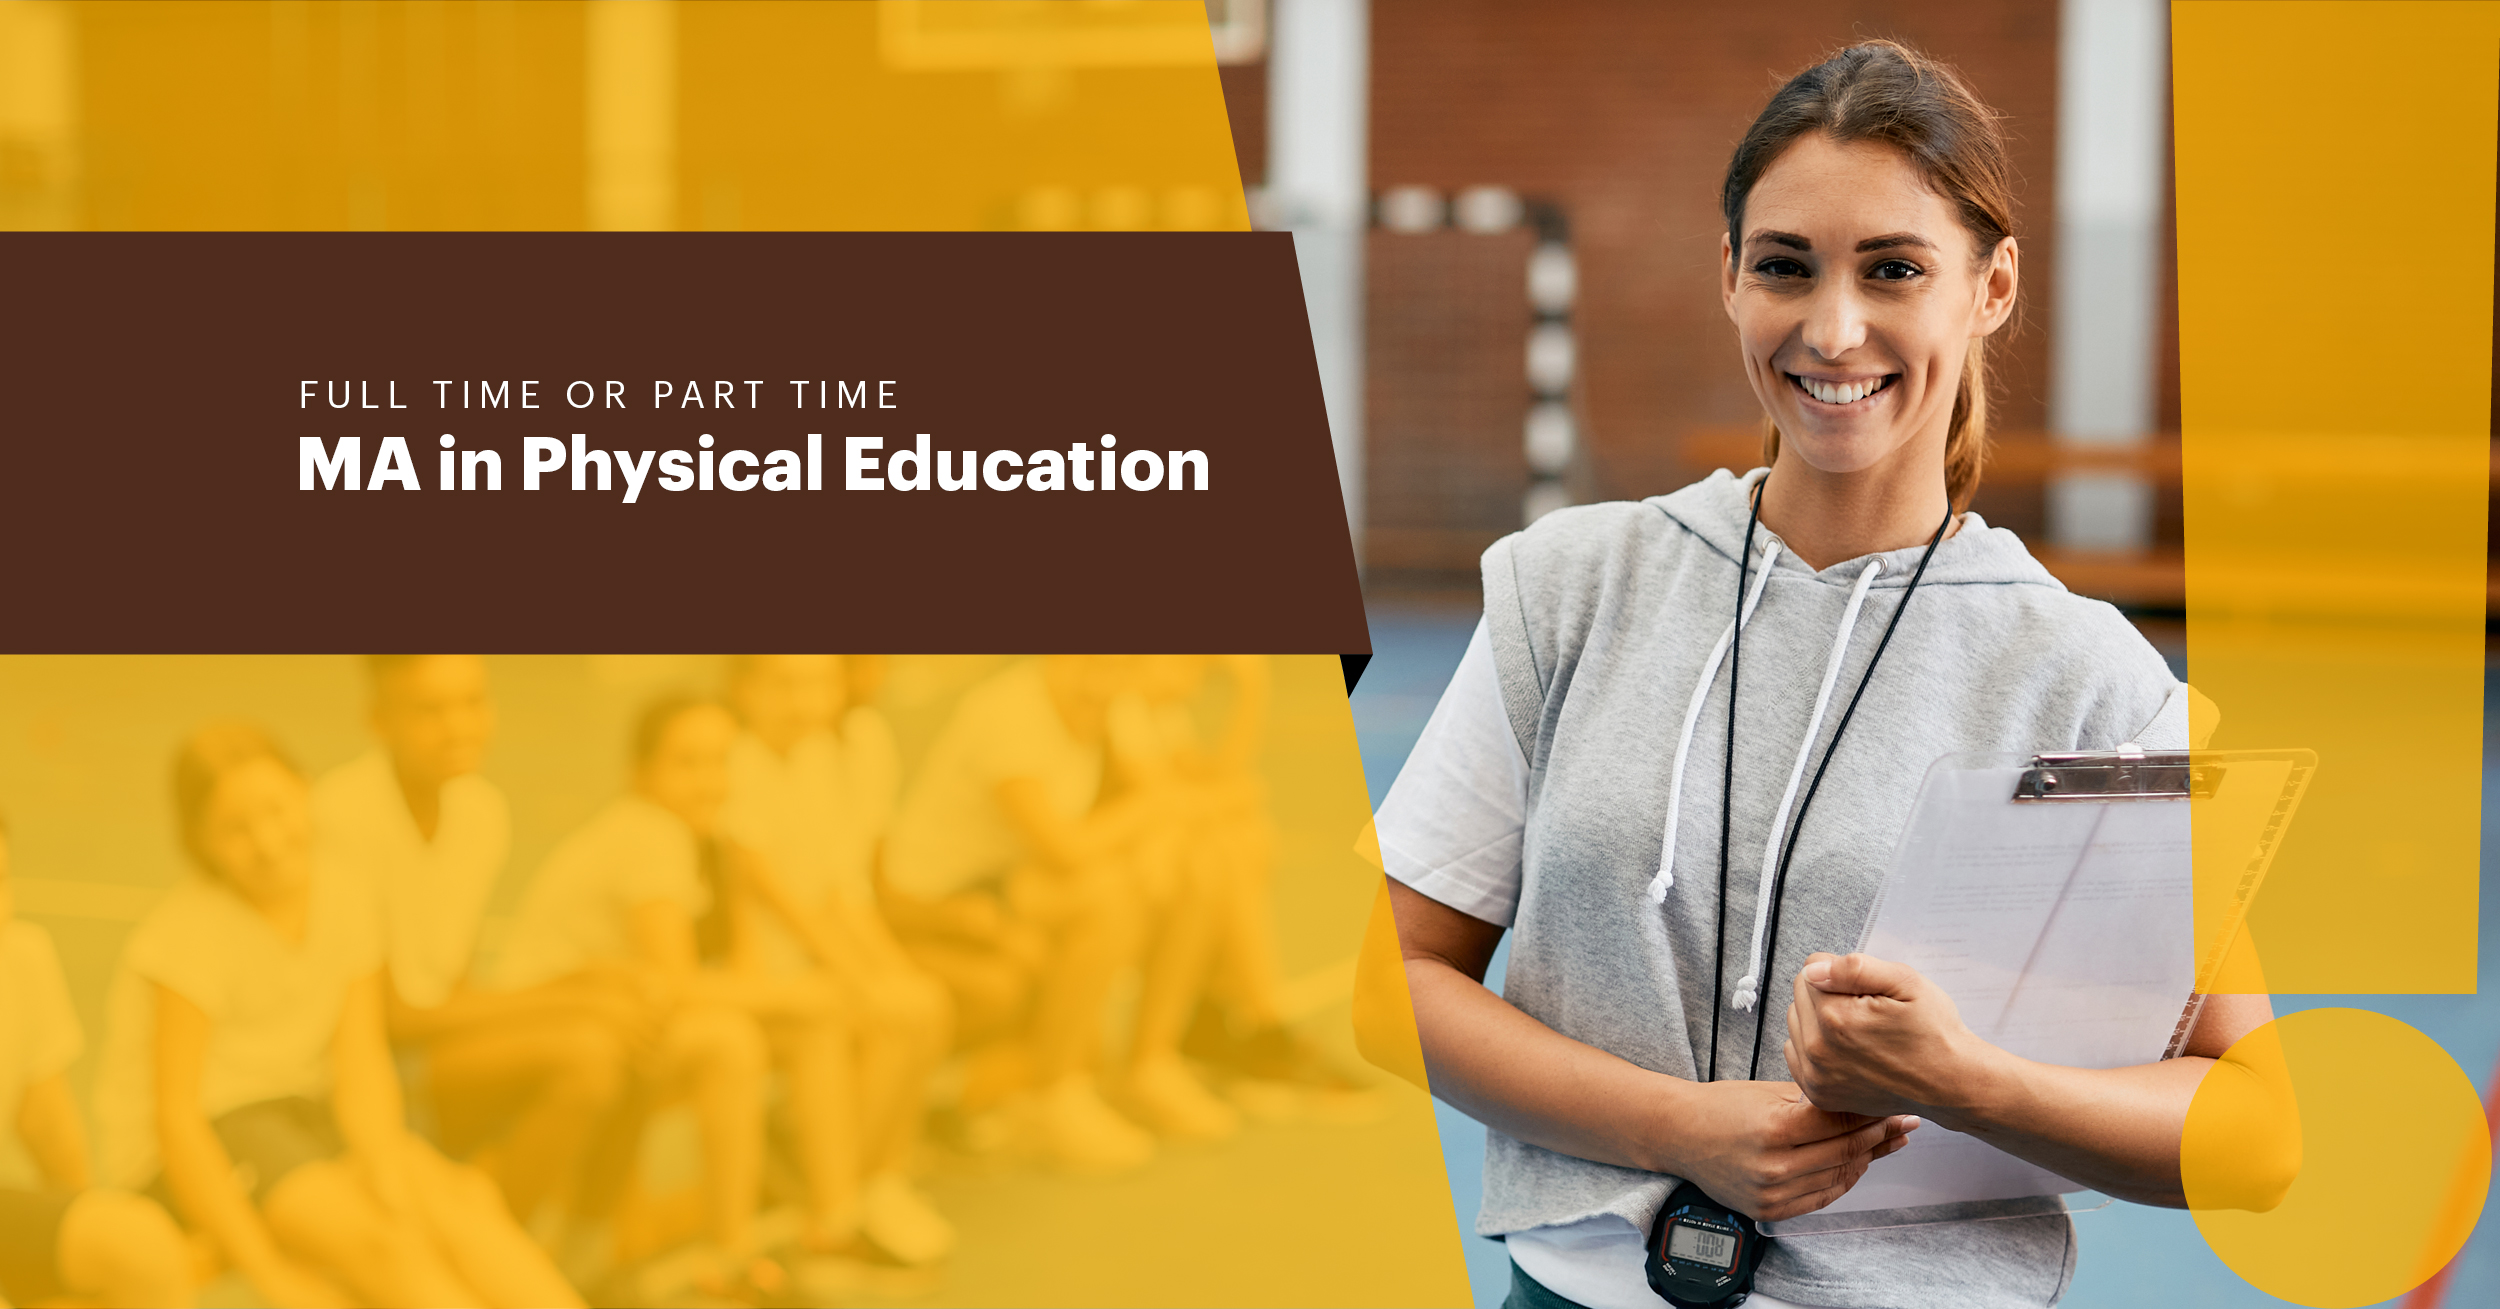 Full time or part time MA in Physical Education